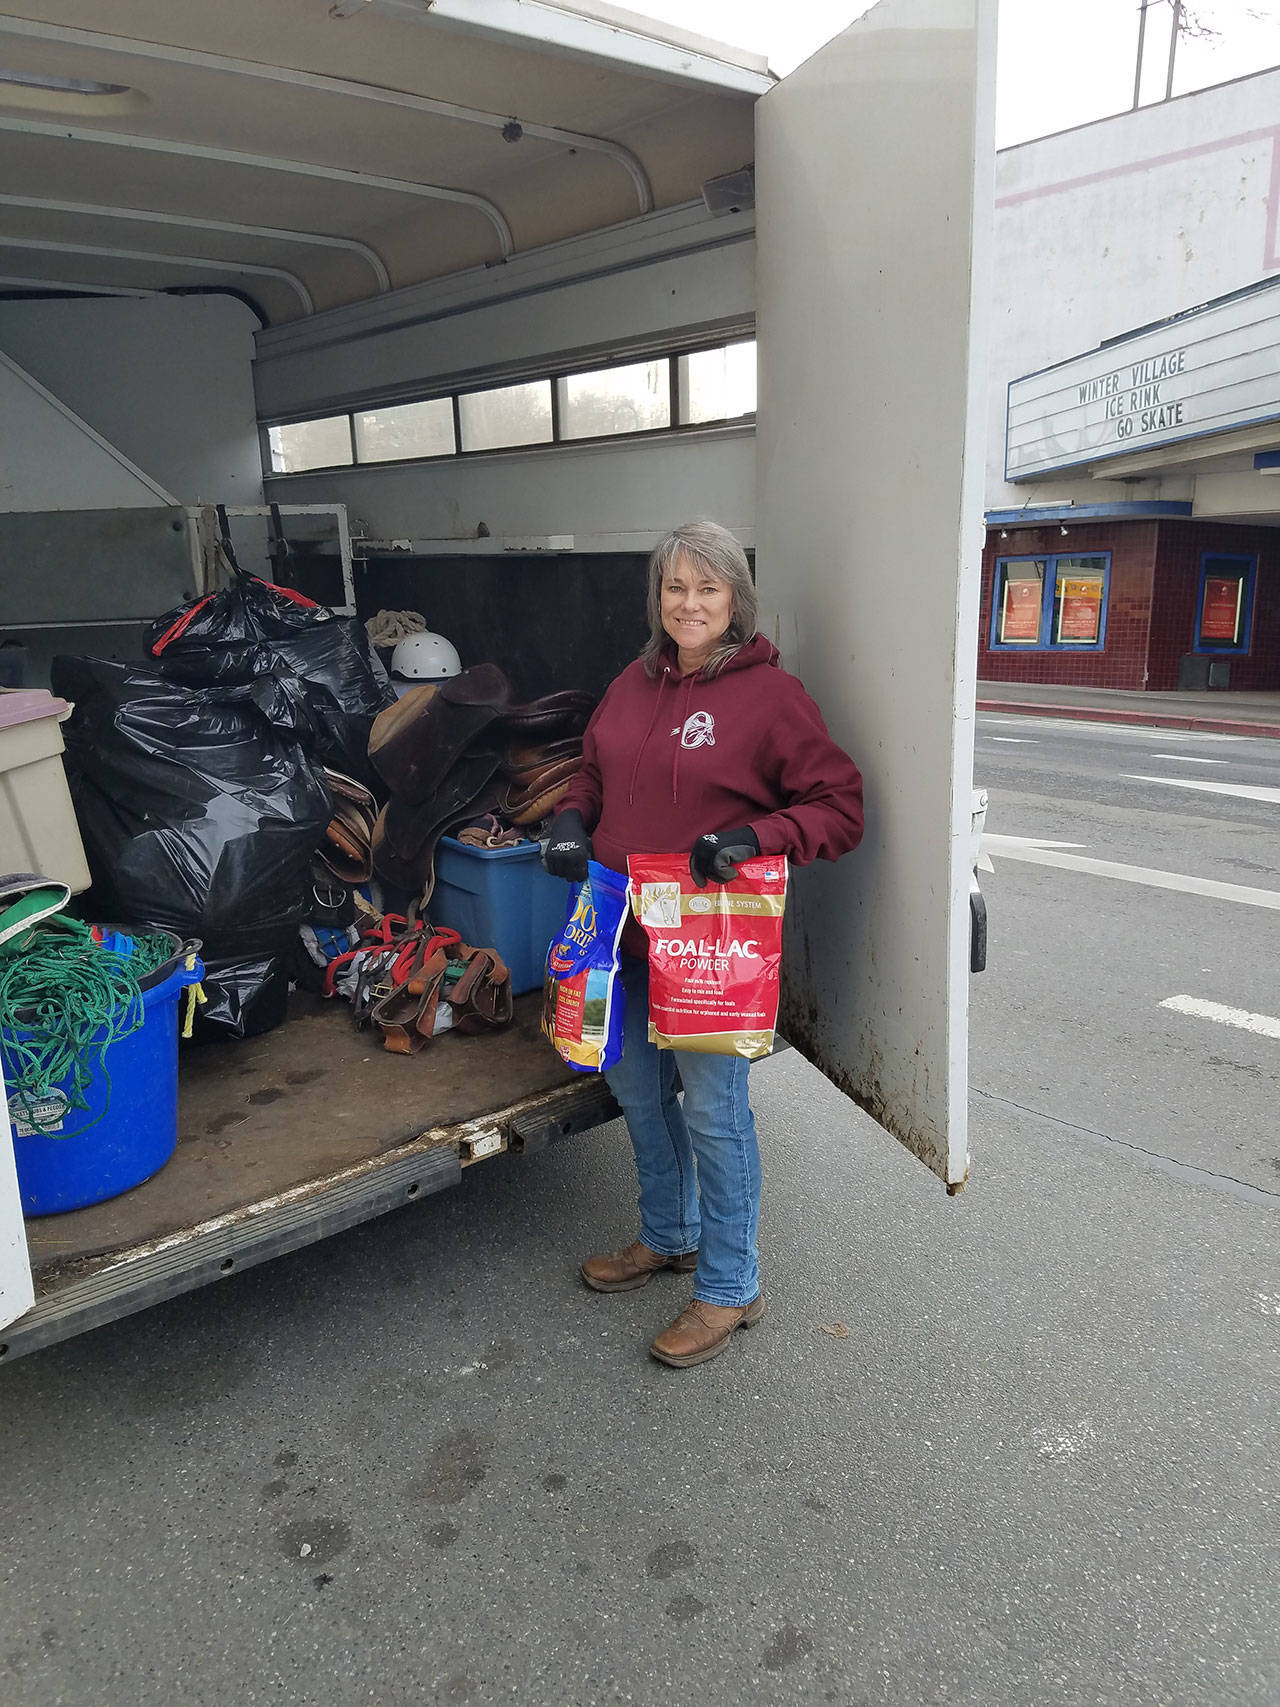 In answer to a call from the Port Angeles Elks Club for horse items to donate to California’s fire victims, Valerie Jackson of the Olympic Peninsula Equine Network unloads items they were going to use for OPEN’s own fundraiser because “we know what it’s like to be in need.” (Diane Royall)